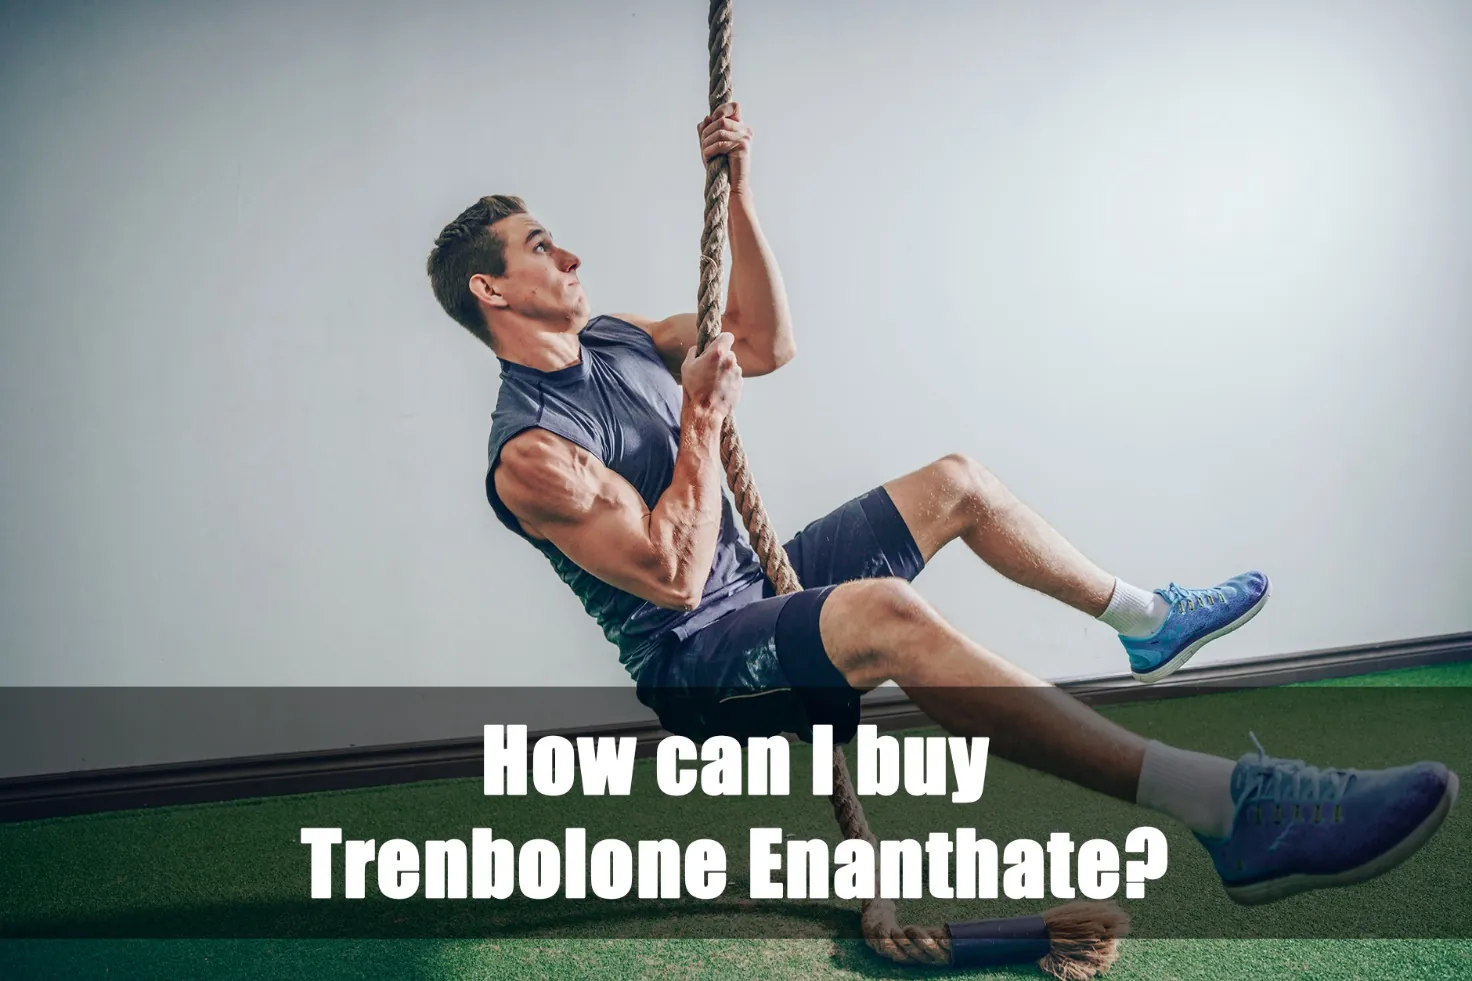 Where to buy Trenbolone Enanthate